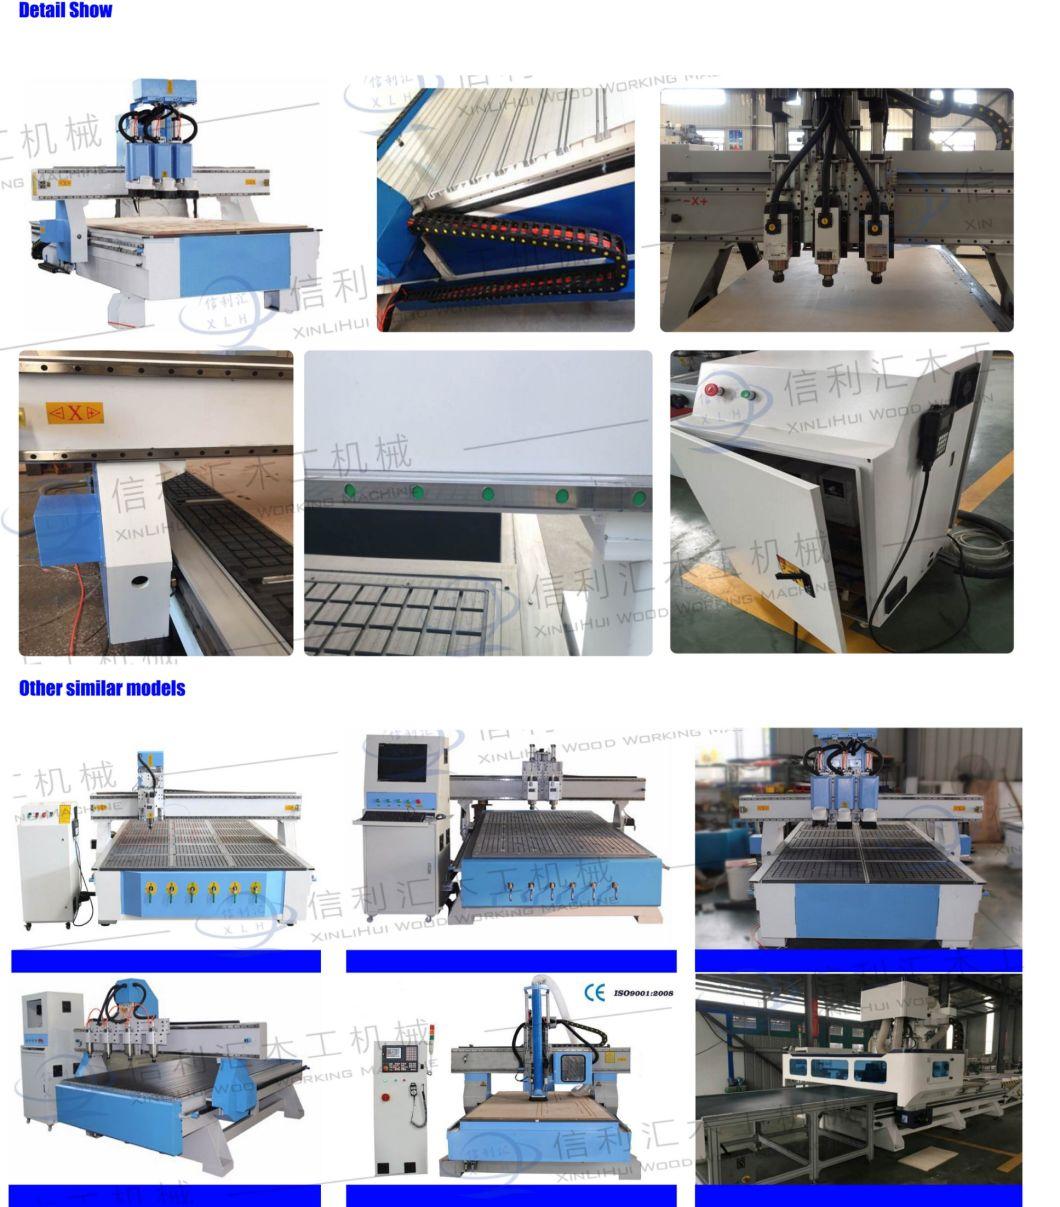 Heavy Duty Three Spindles Auto Change Tools CNC Wood Carving Machine, CNC Engraver Wooden Furniture / Wood Timber Nesting Making Atc CNC Router Milling Machine